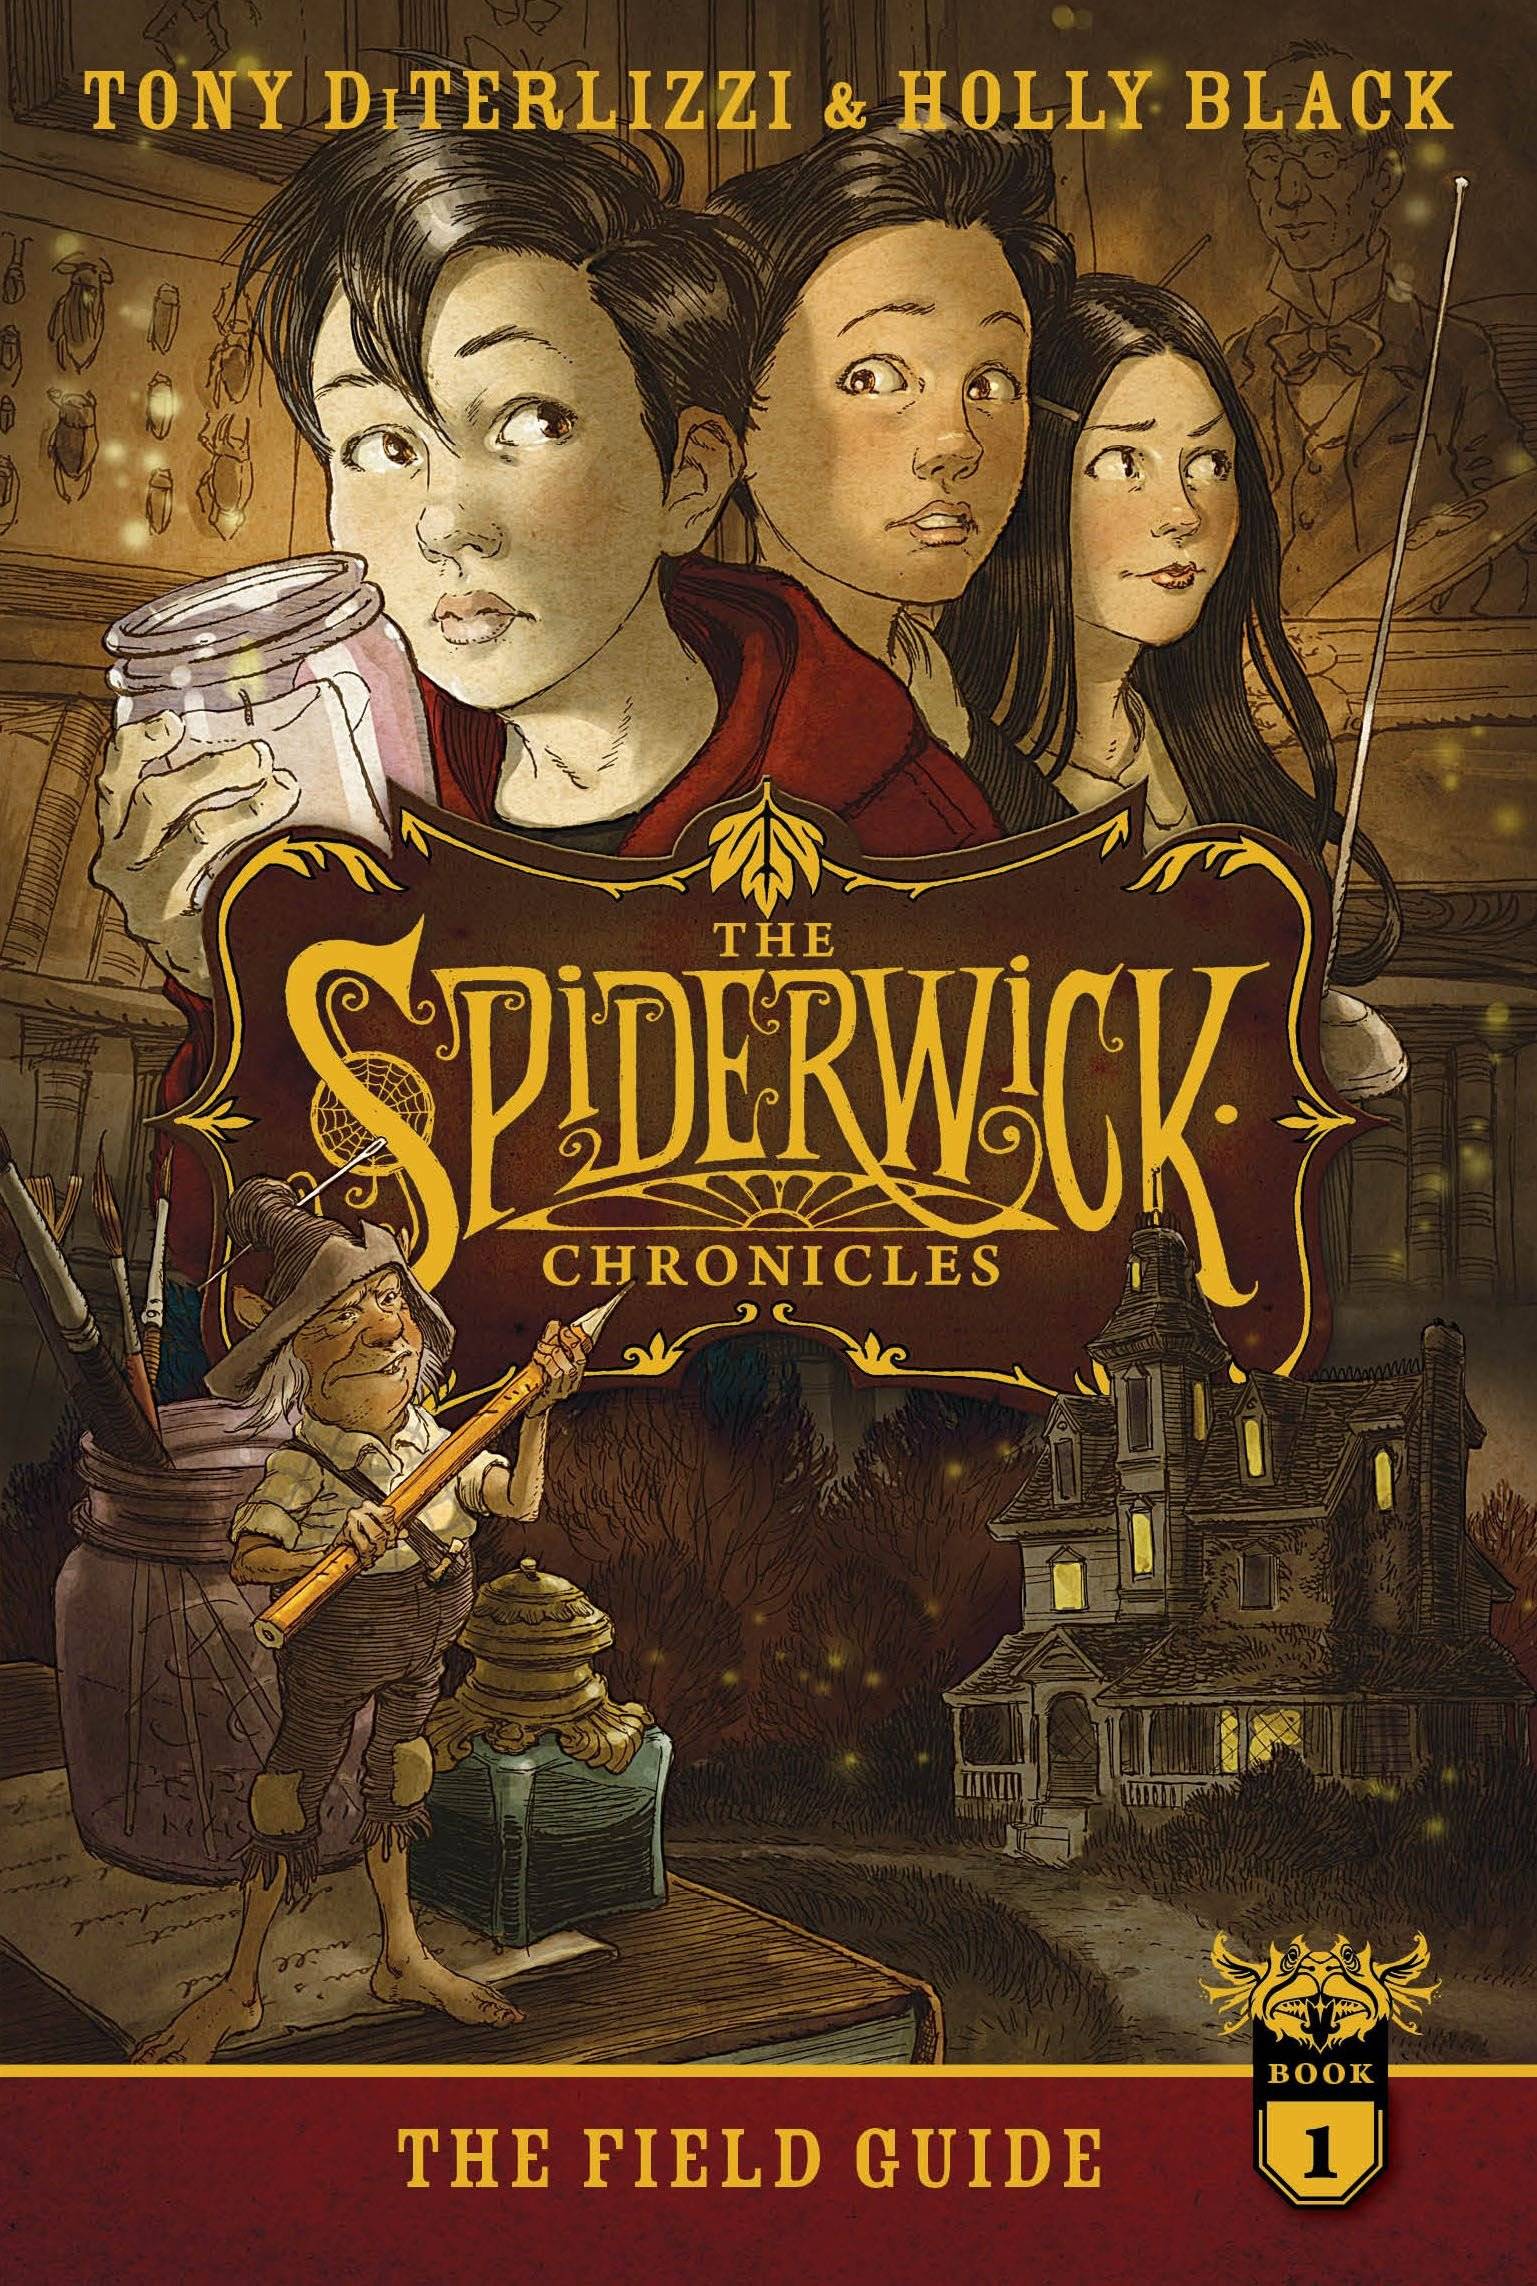 IMG : The Spiderwick Chronicles The Field Guide#1